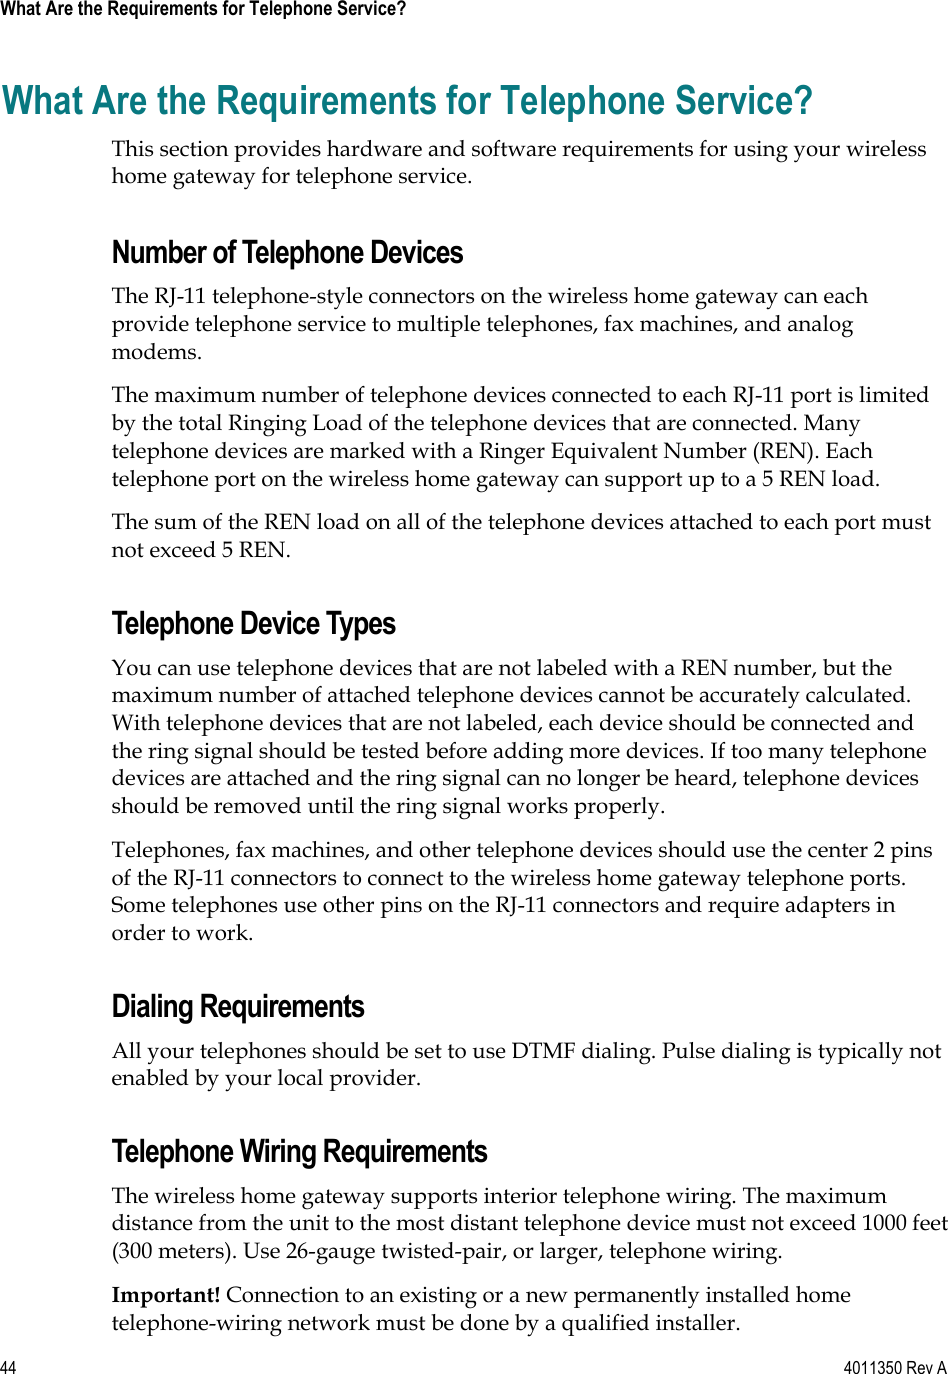 44    4011350 Rev A What Are the Requirements for Telephone Service? What Are the Requirements for Telephone Service? This section provides hardware and software requirements for using your wireless home gateway for telephone service. Number of Telephone Devices The RJ-11 telephone-style connectors on the wireless home gateway can each provide telephone service to multiple telephones, fax machines, and analog modems.The maximum number of telephone devices connected to each RJ-11 port is limited by the total Ringing Load of the telephone devices that are connected. Many telephone devices are marked with a Ringer Equivalent Number (REN). Each telephone port on the wireless home gateway can support up to a 5 REN load.  The sum of the REN load on all of the telephone devices attached to each port must not exceed 5 REN. Telephone Device Types You can use telephone devices that are not labeled with a REN number, but the maximum number of attached telephone devices cannot be accurately calculated. With telephone devices that are not labeled, each device should be connected and the ring signal should be tested before adding more devices. If too many telephone devices are attached and the ring signal can no longer be heard, telephone devices should be removed until the ring signal works properly. Telephones, fax machines, and other telephone devices should use the center 2 pins of the RJ-11 connectors to connect to the wireless home gateway telephone ports. Some telephones use other pins on the RJ-11 connectors and require adapters in order to work. Dialing Requirements All your telephones should be set to use DTMF dialing. Pulse dialing is typically not enabled by your local provider. Telephone Wiring Requirements The wireless home gateway supports interior telephone wiring. The maximum distance from the unit to the most distant telephone device must not exceed 1000 feet (300 meters). Use 26-gauge twisted-pair, or larger, telephone wiring. Important! Connection to an existing or a new permanently installed home telephone-wiring network must be done by a qualified installer. 